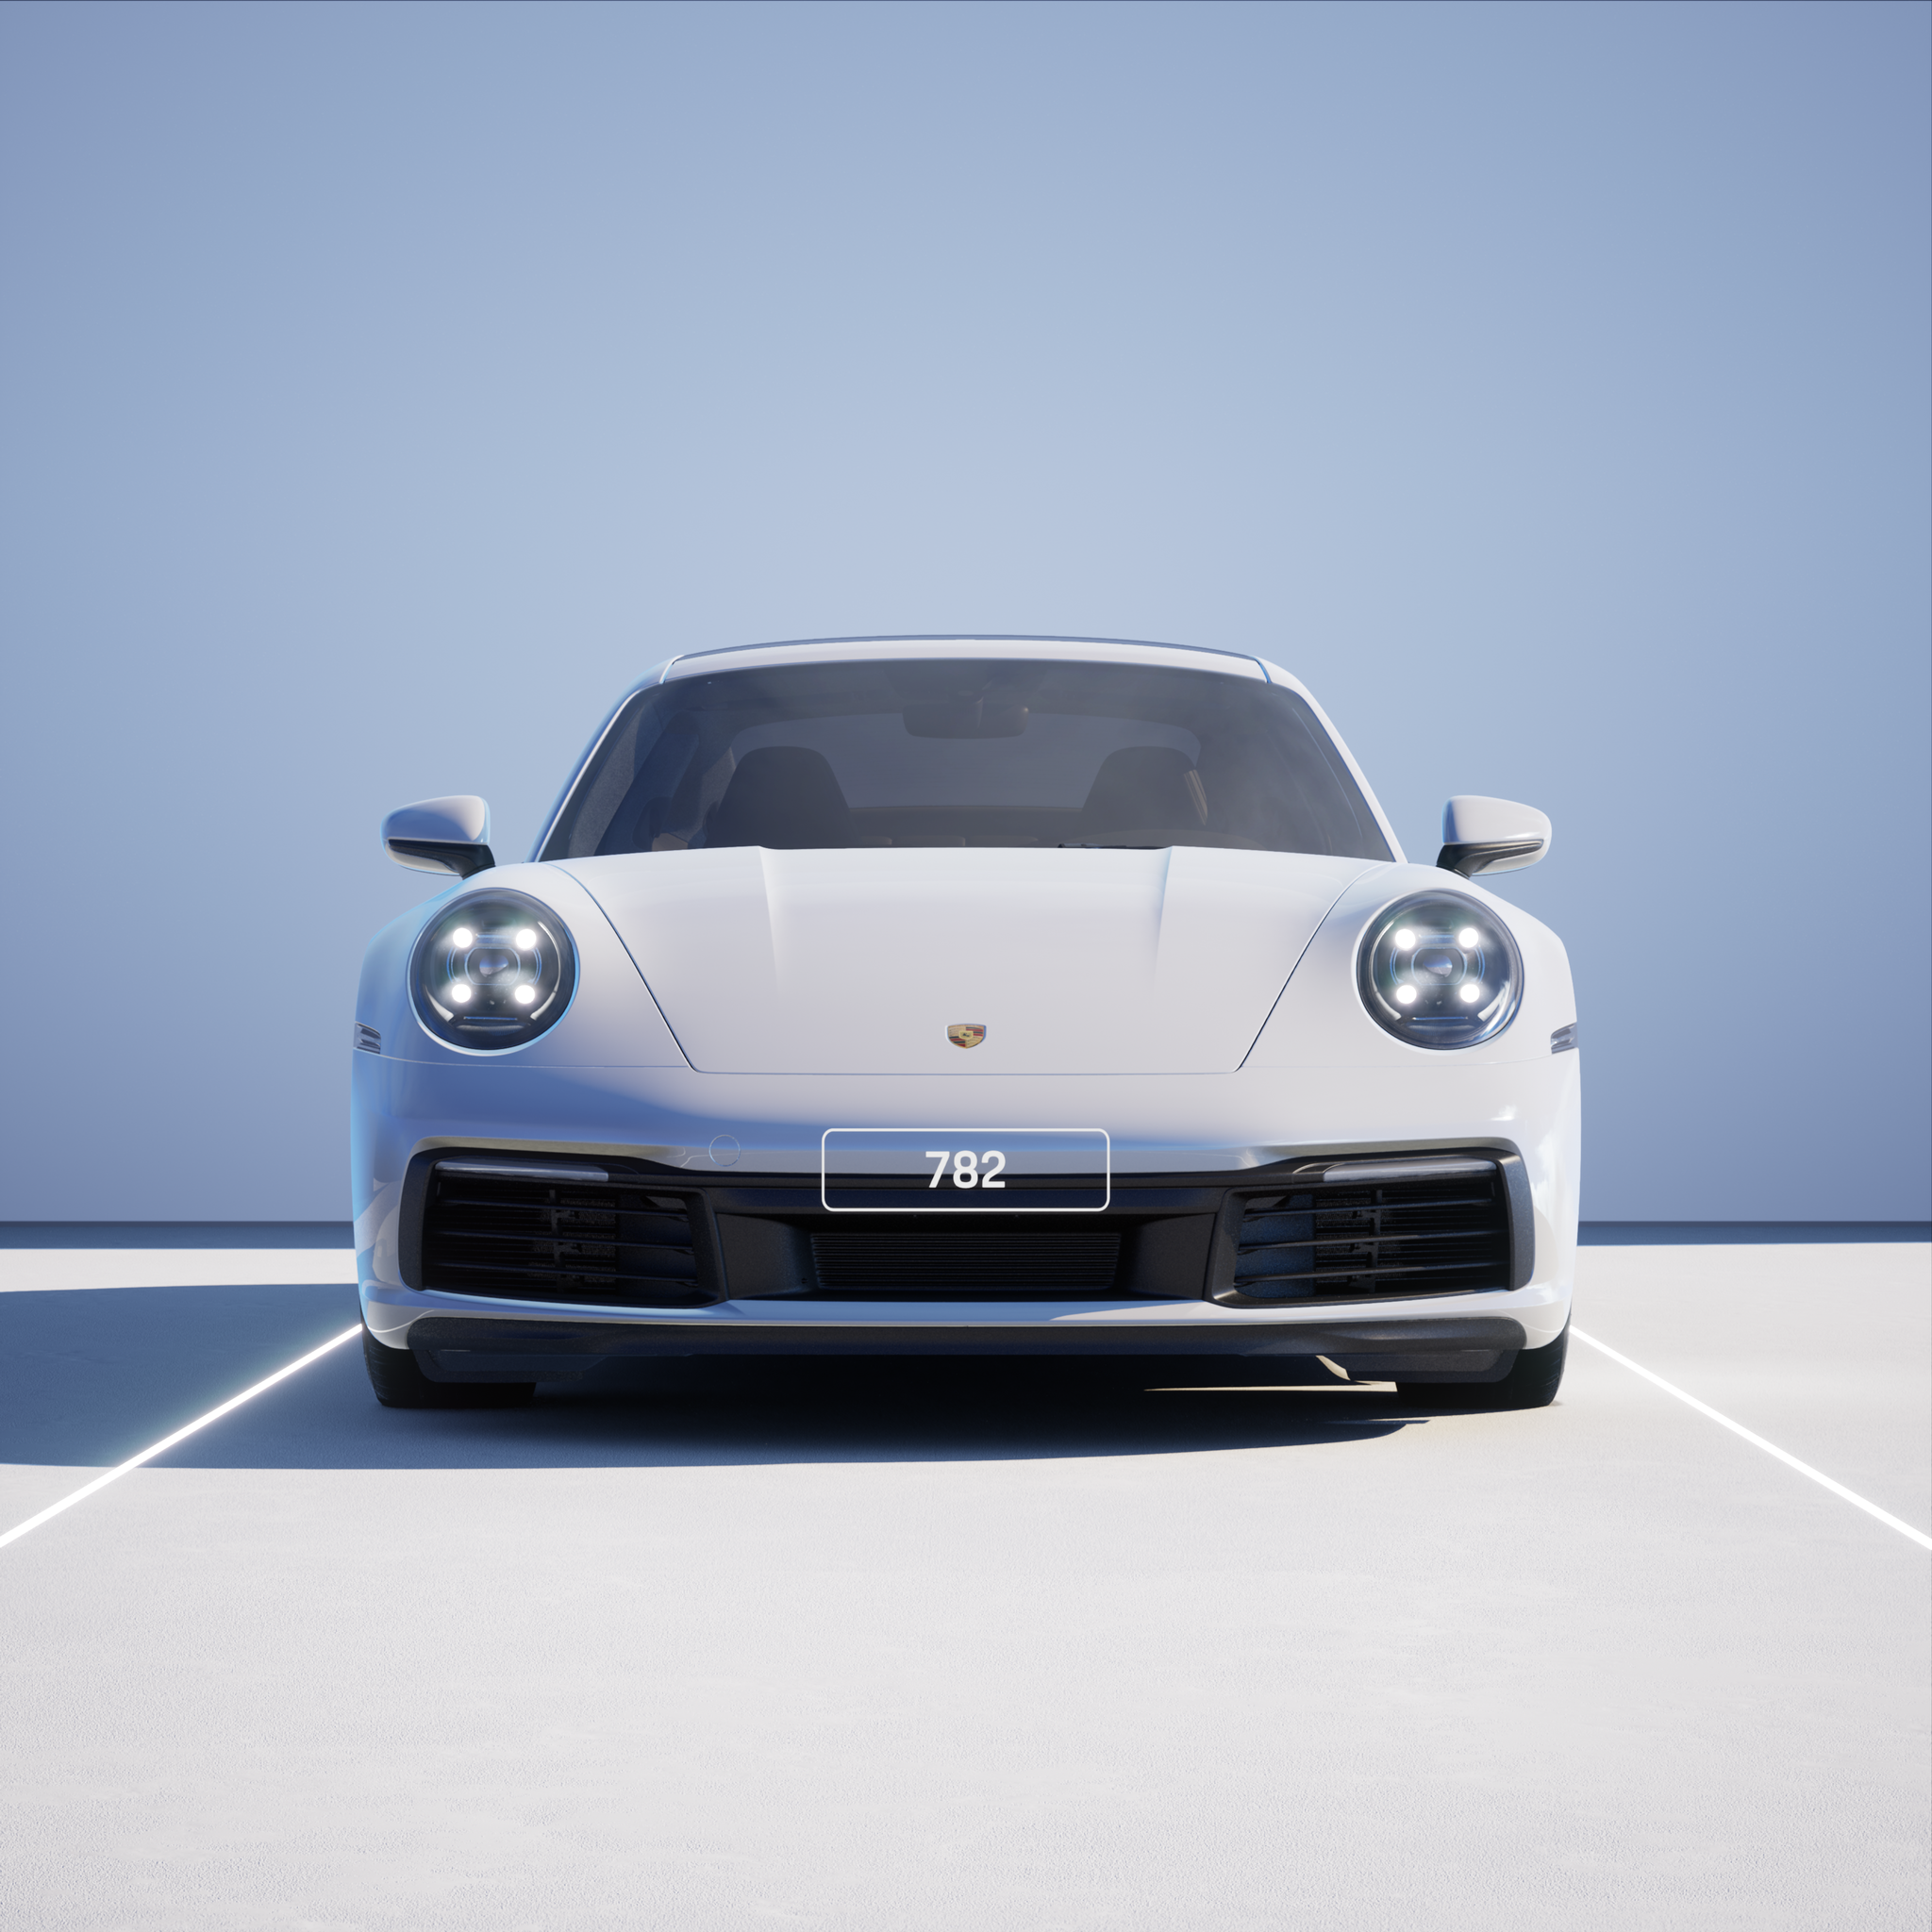 The PORSCHΞ 911 782 image in phase